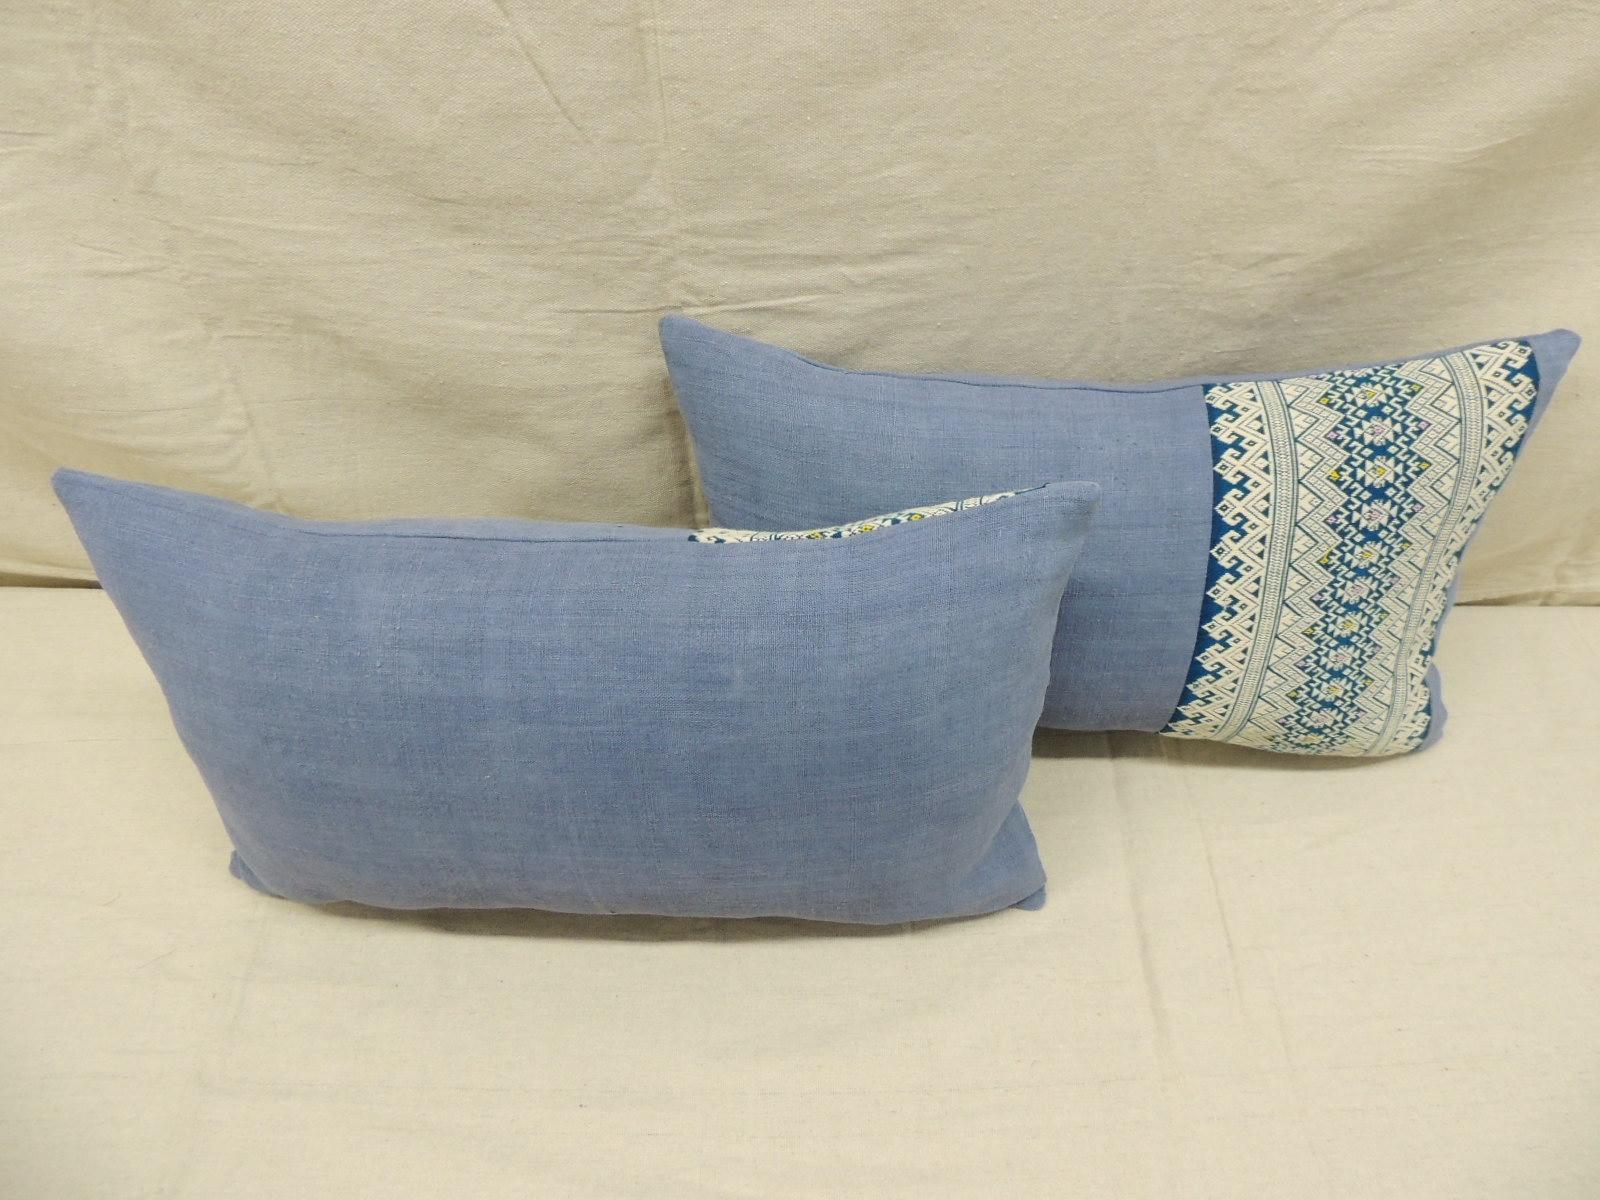 Pair of Vintage Blue and White Asian Decorative Lumbar Pillows 1